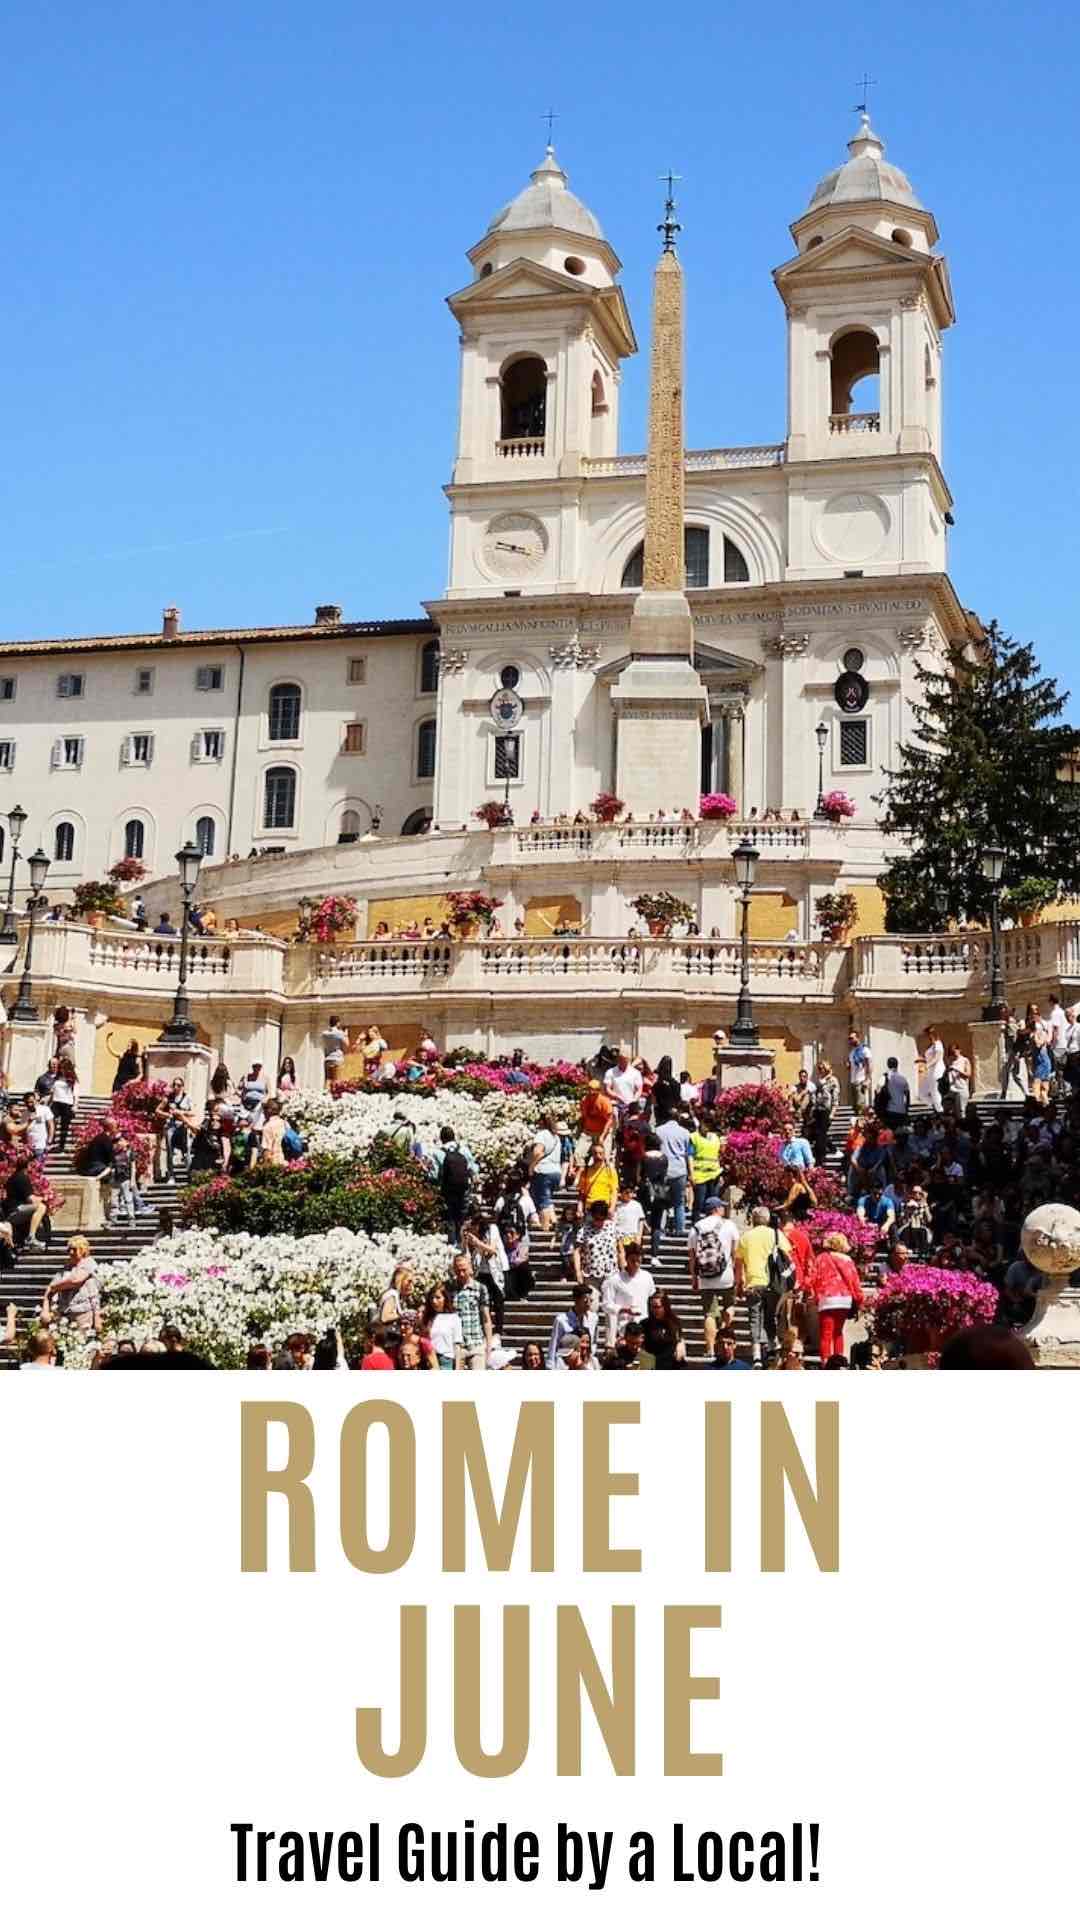 Spanish Steps in Rome with flowers. Overlay text says: Rome In June, travel guide by a local